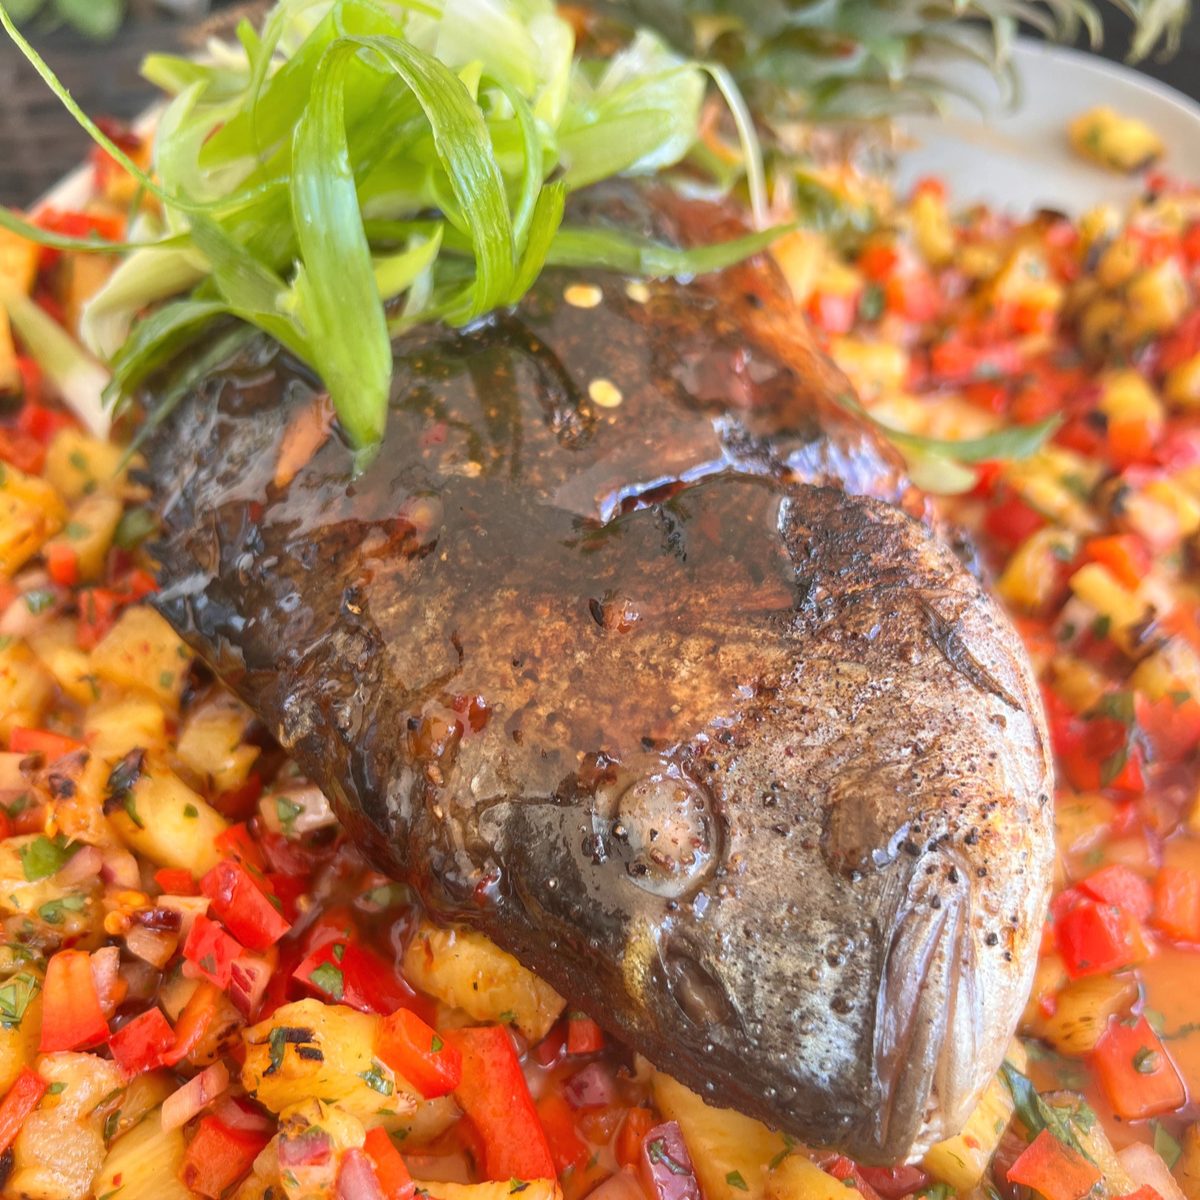 grilled whole seam bream with sweet chili heat sauce and pineapple salad